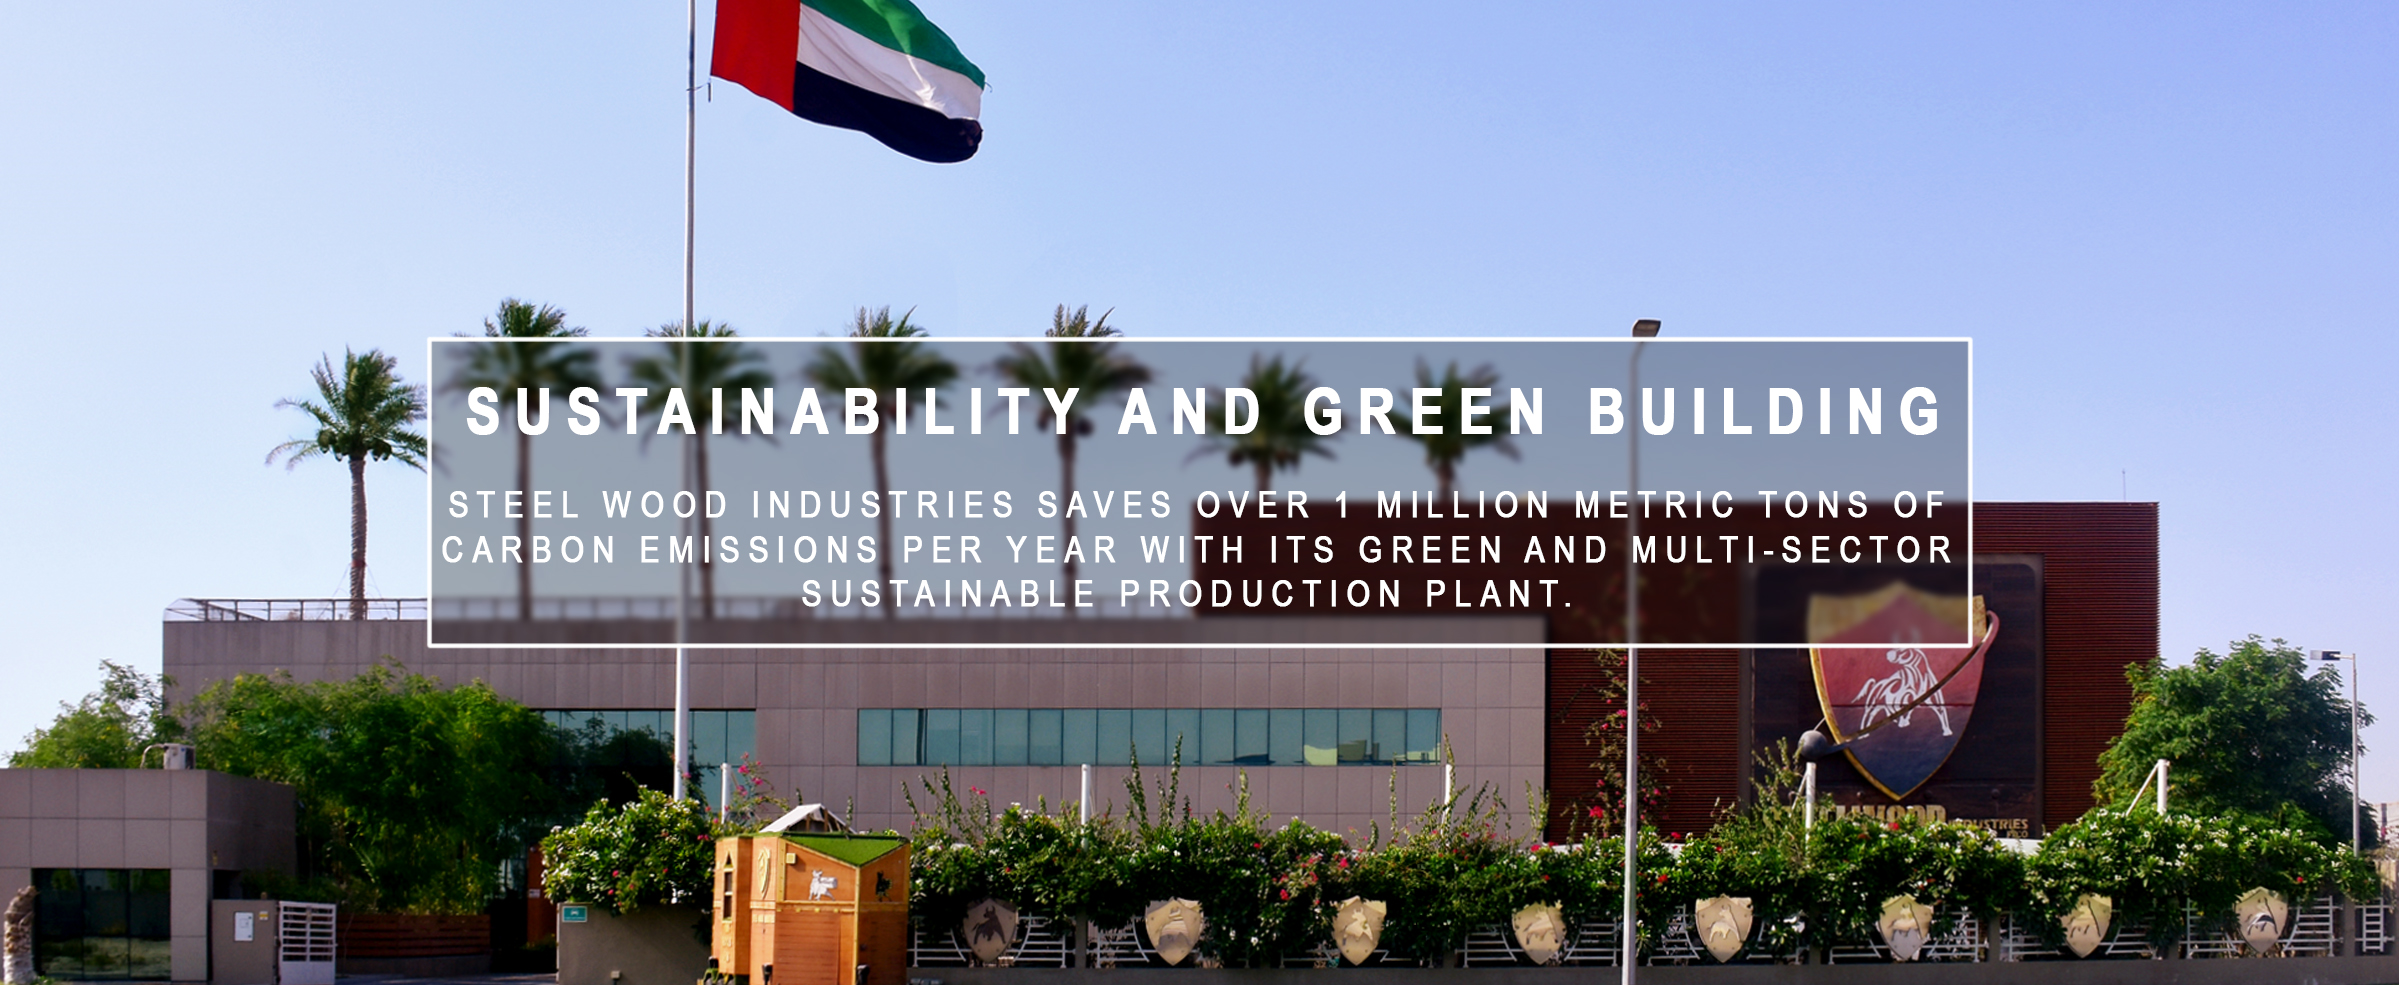 Sustainability and green building - SWI